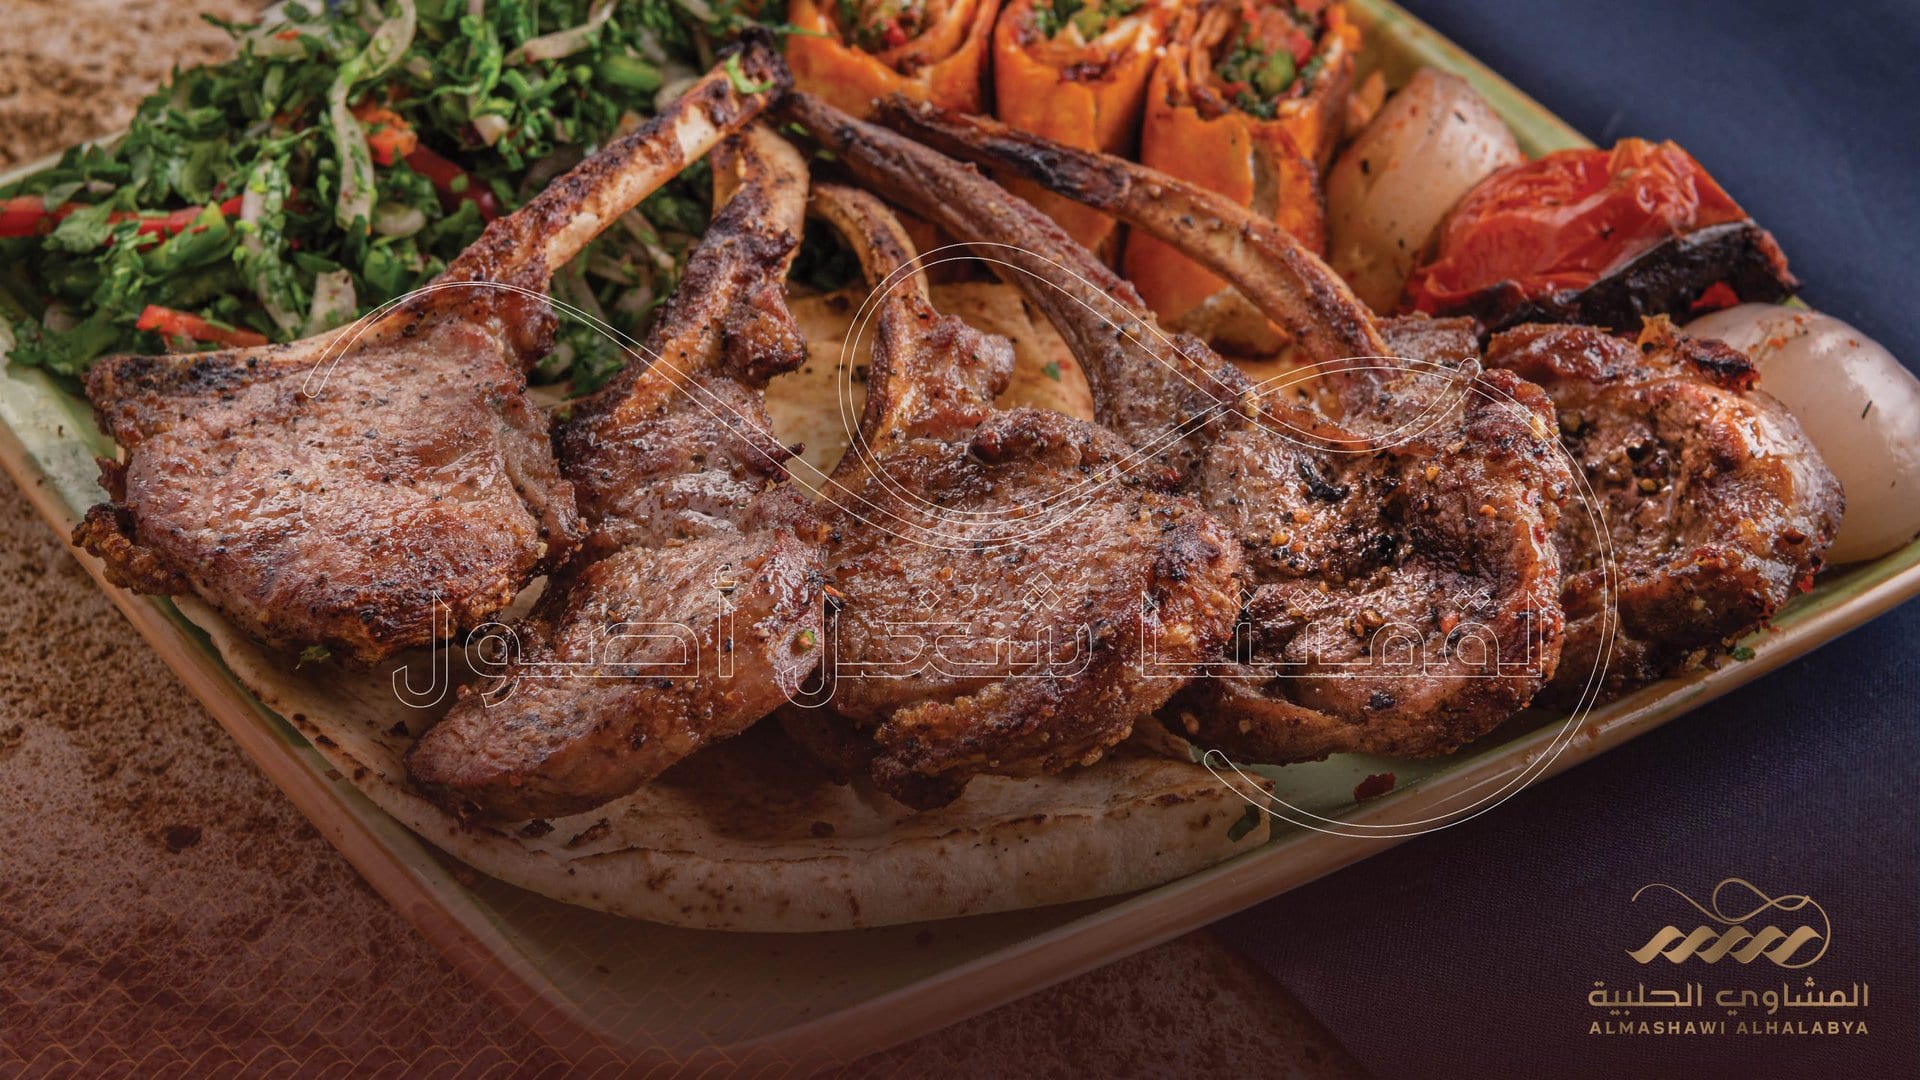 Get Delicious Barbecue Meat Made Just for You: Enjoy the Best Tasty Grilled Meat in Sharjah